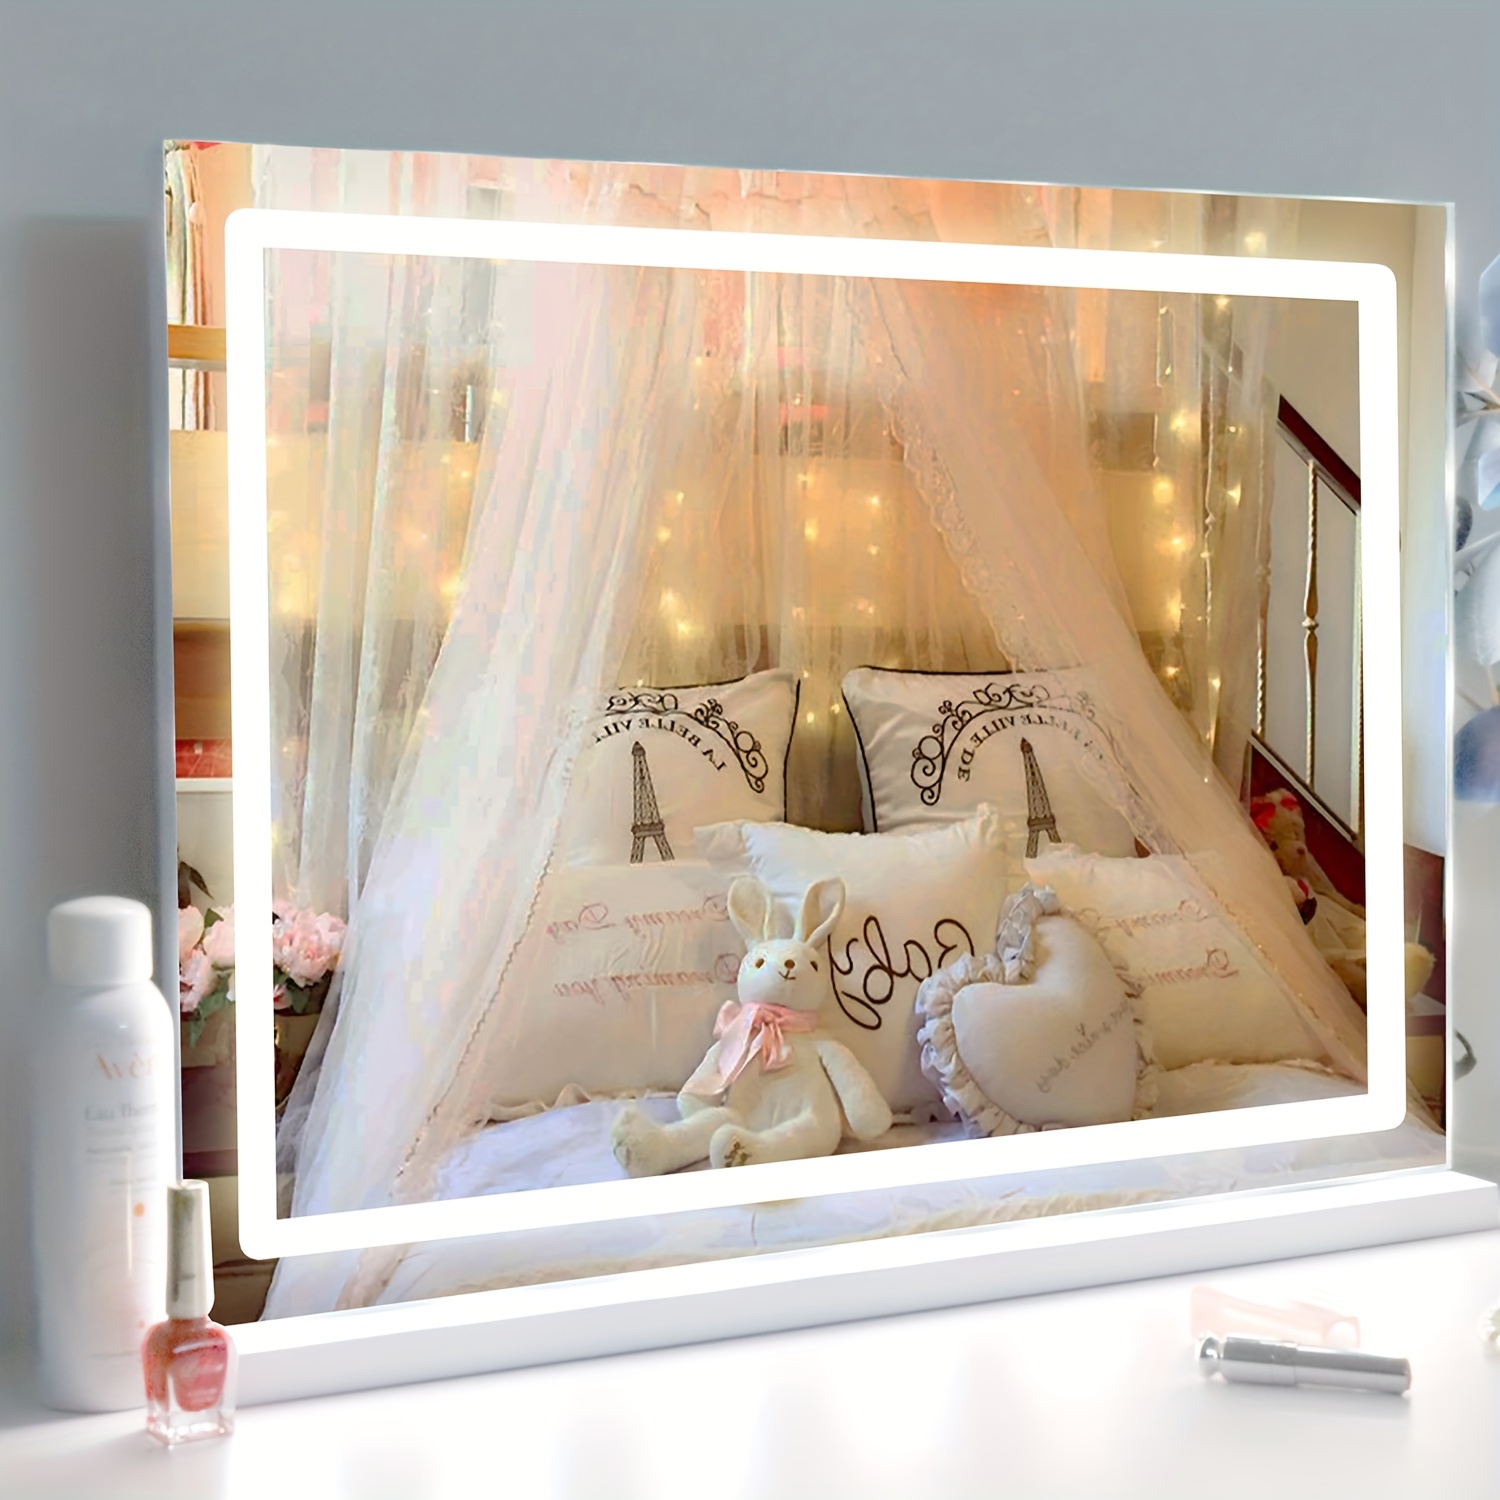 

Vanity Mirror With Lights, Large Led Lighted Mirror With Usb Charging Port, Smart Touch 3 Colors Dimmable, Touch Control For Bedroom, White